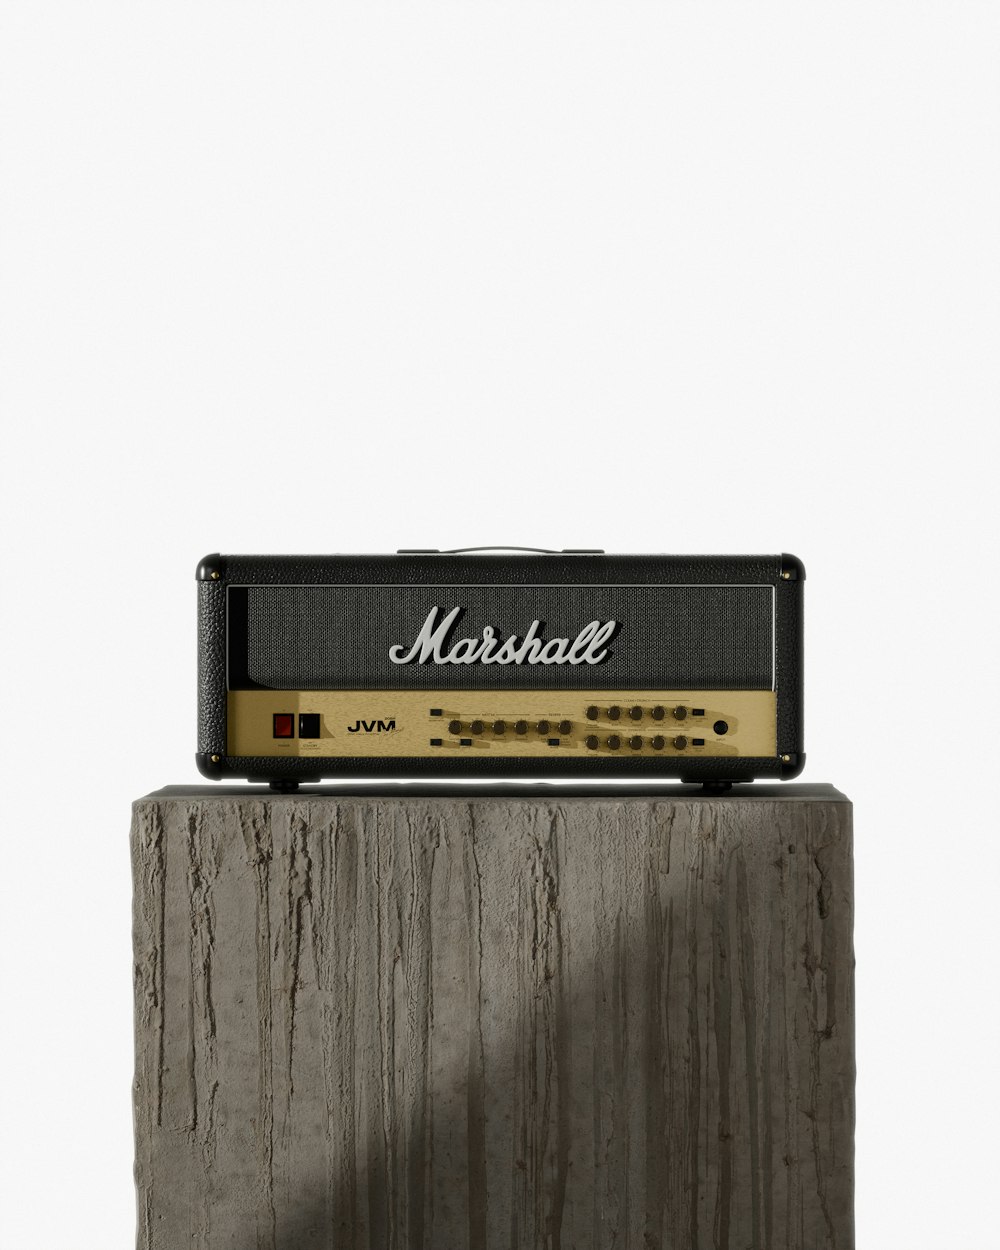 a marshall amp sitting on top of a piece of wood